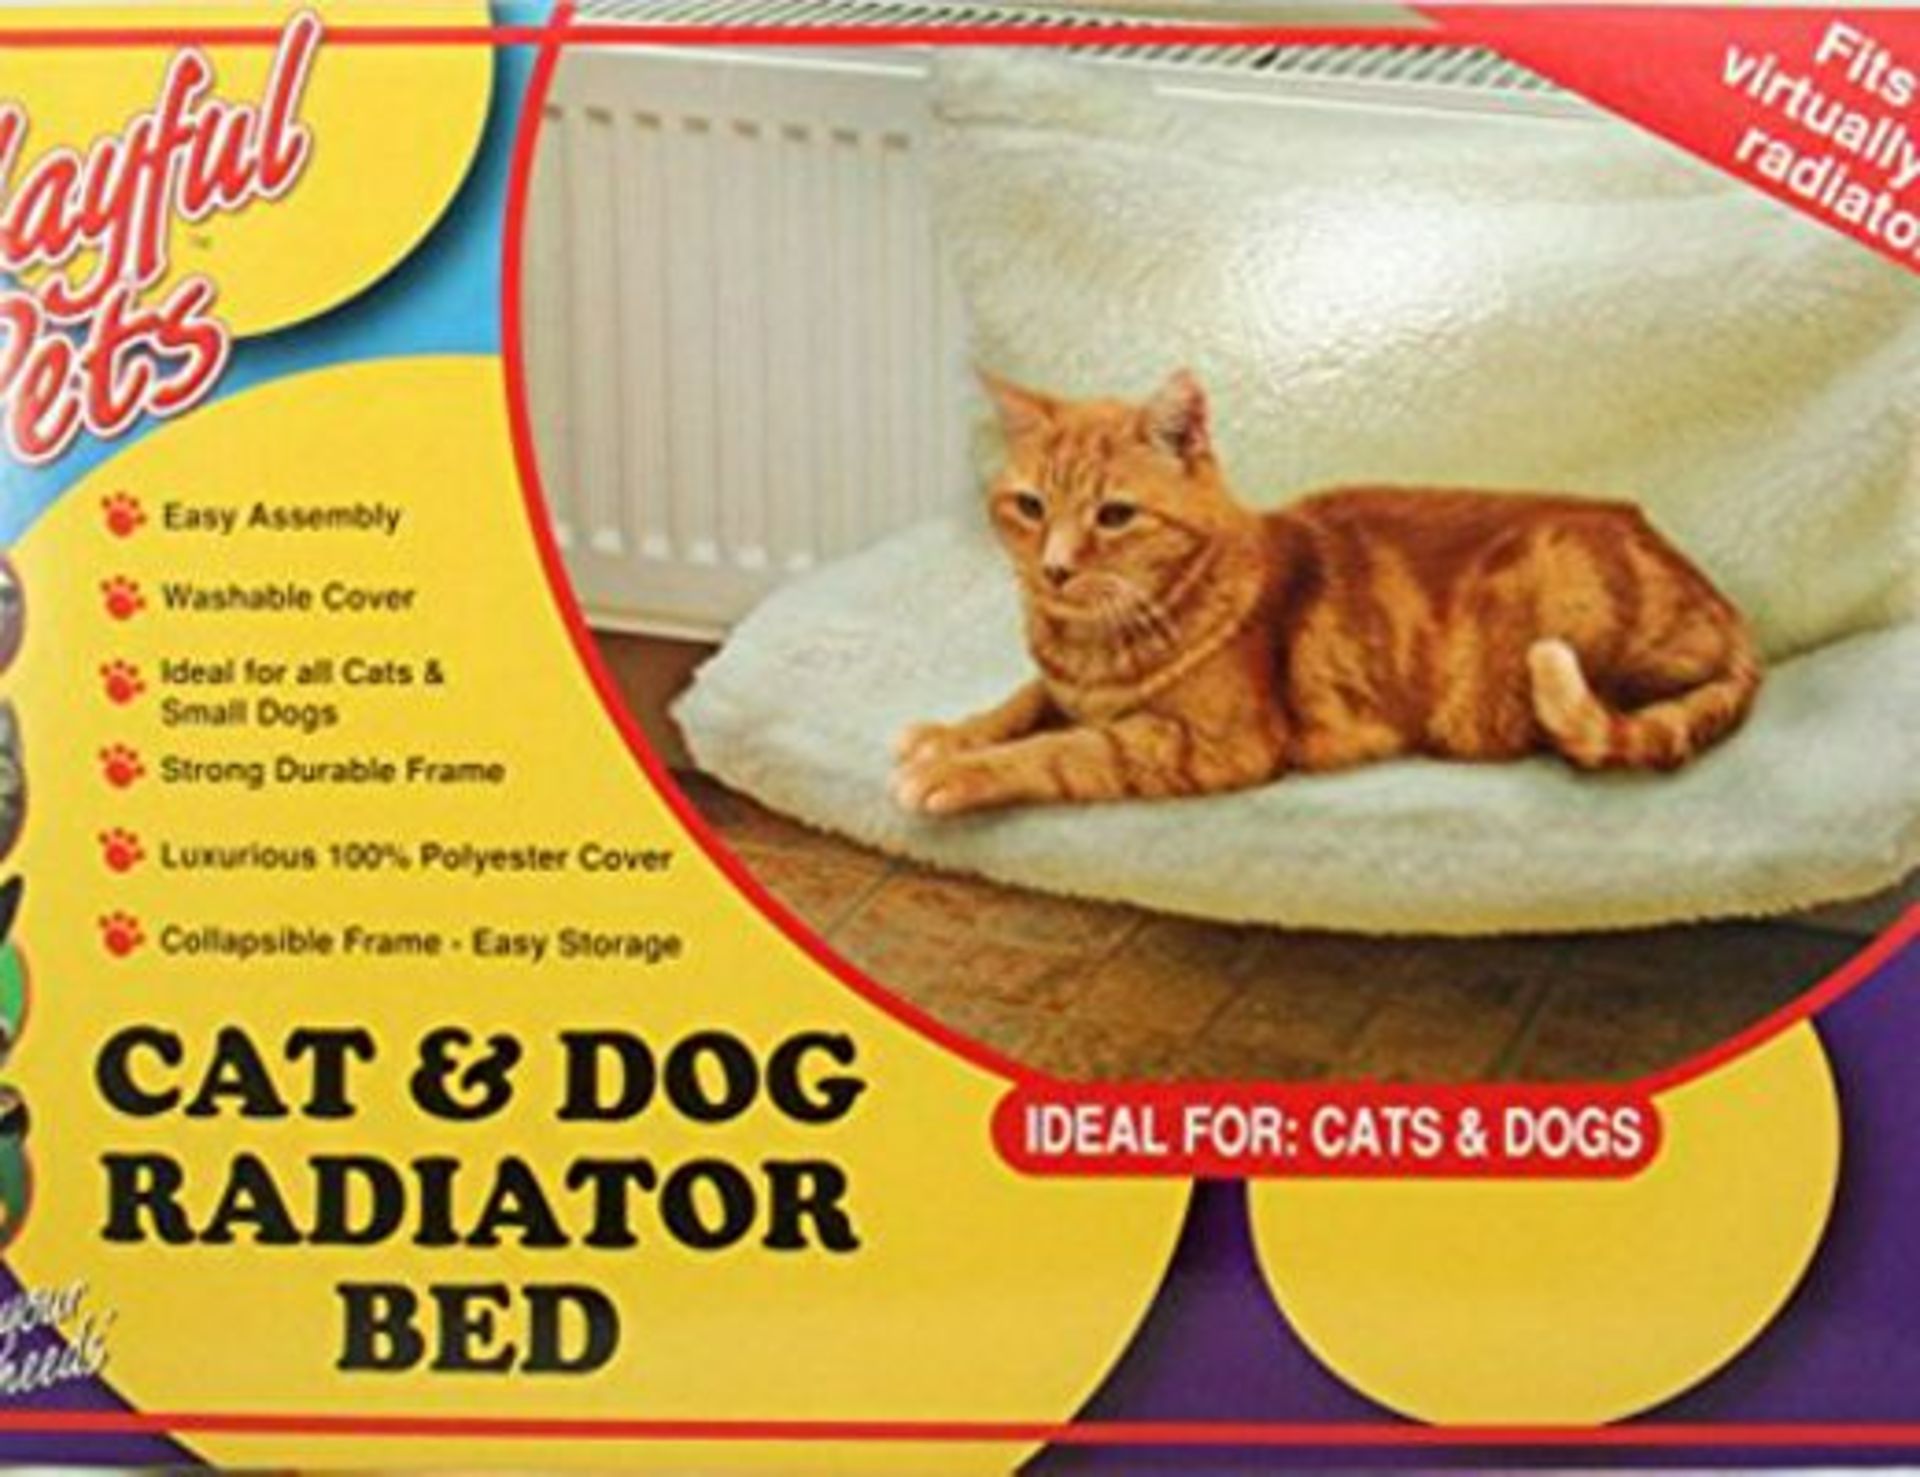 V Brand New Cat Or Dog Radiator Bed With Washable Cover & Strong Frame